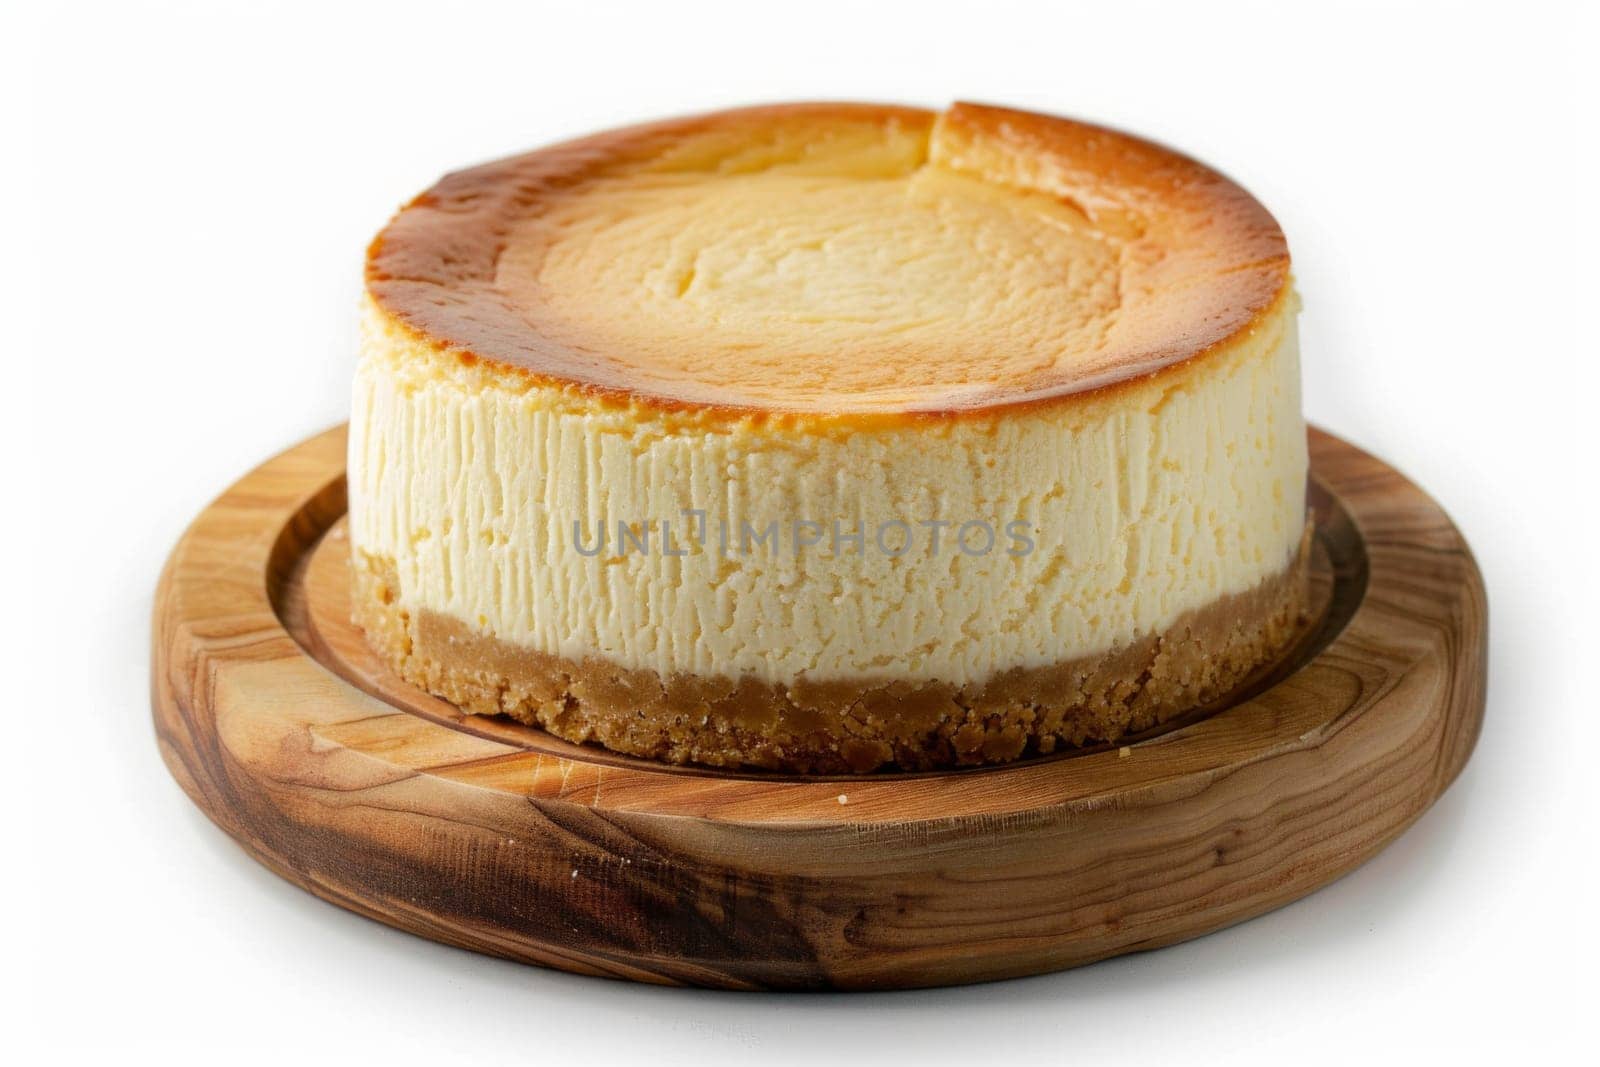 front view of single classic New York cheesecake on a wooden tray isolated on a white background by papatonic